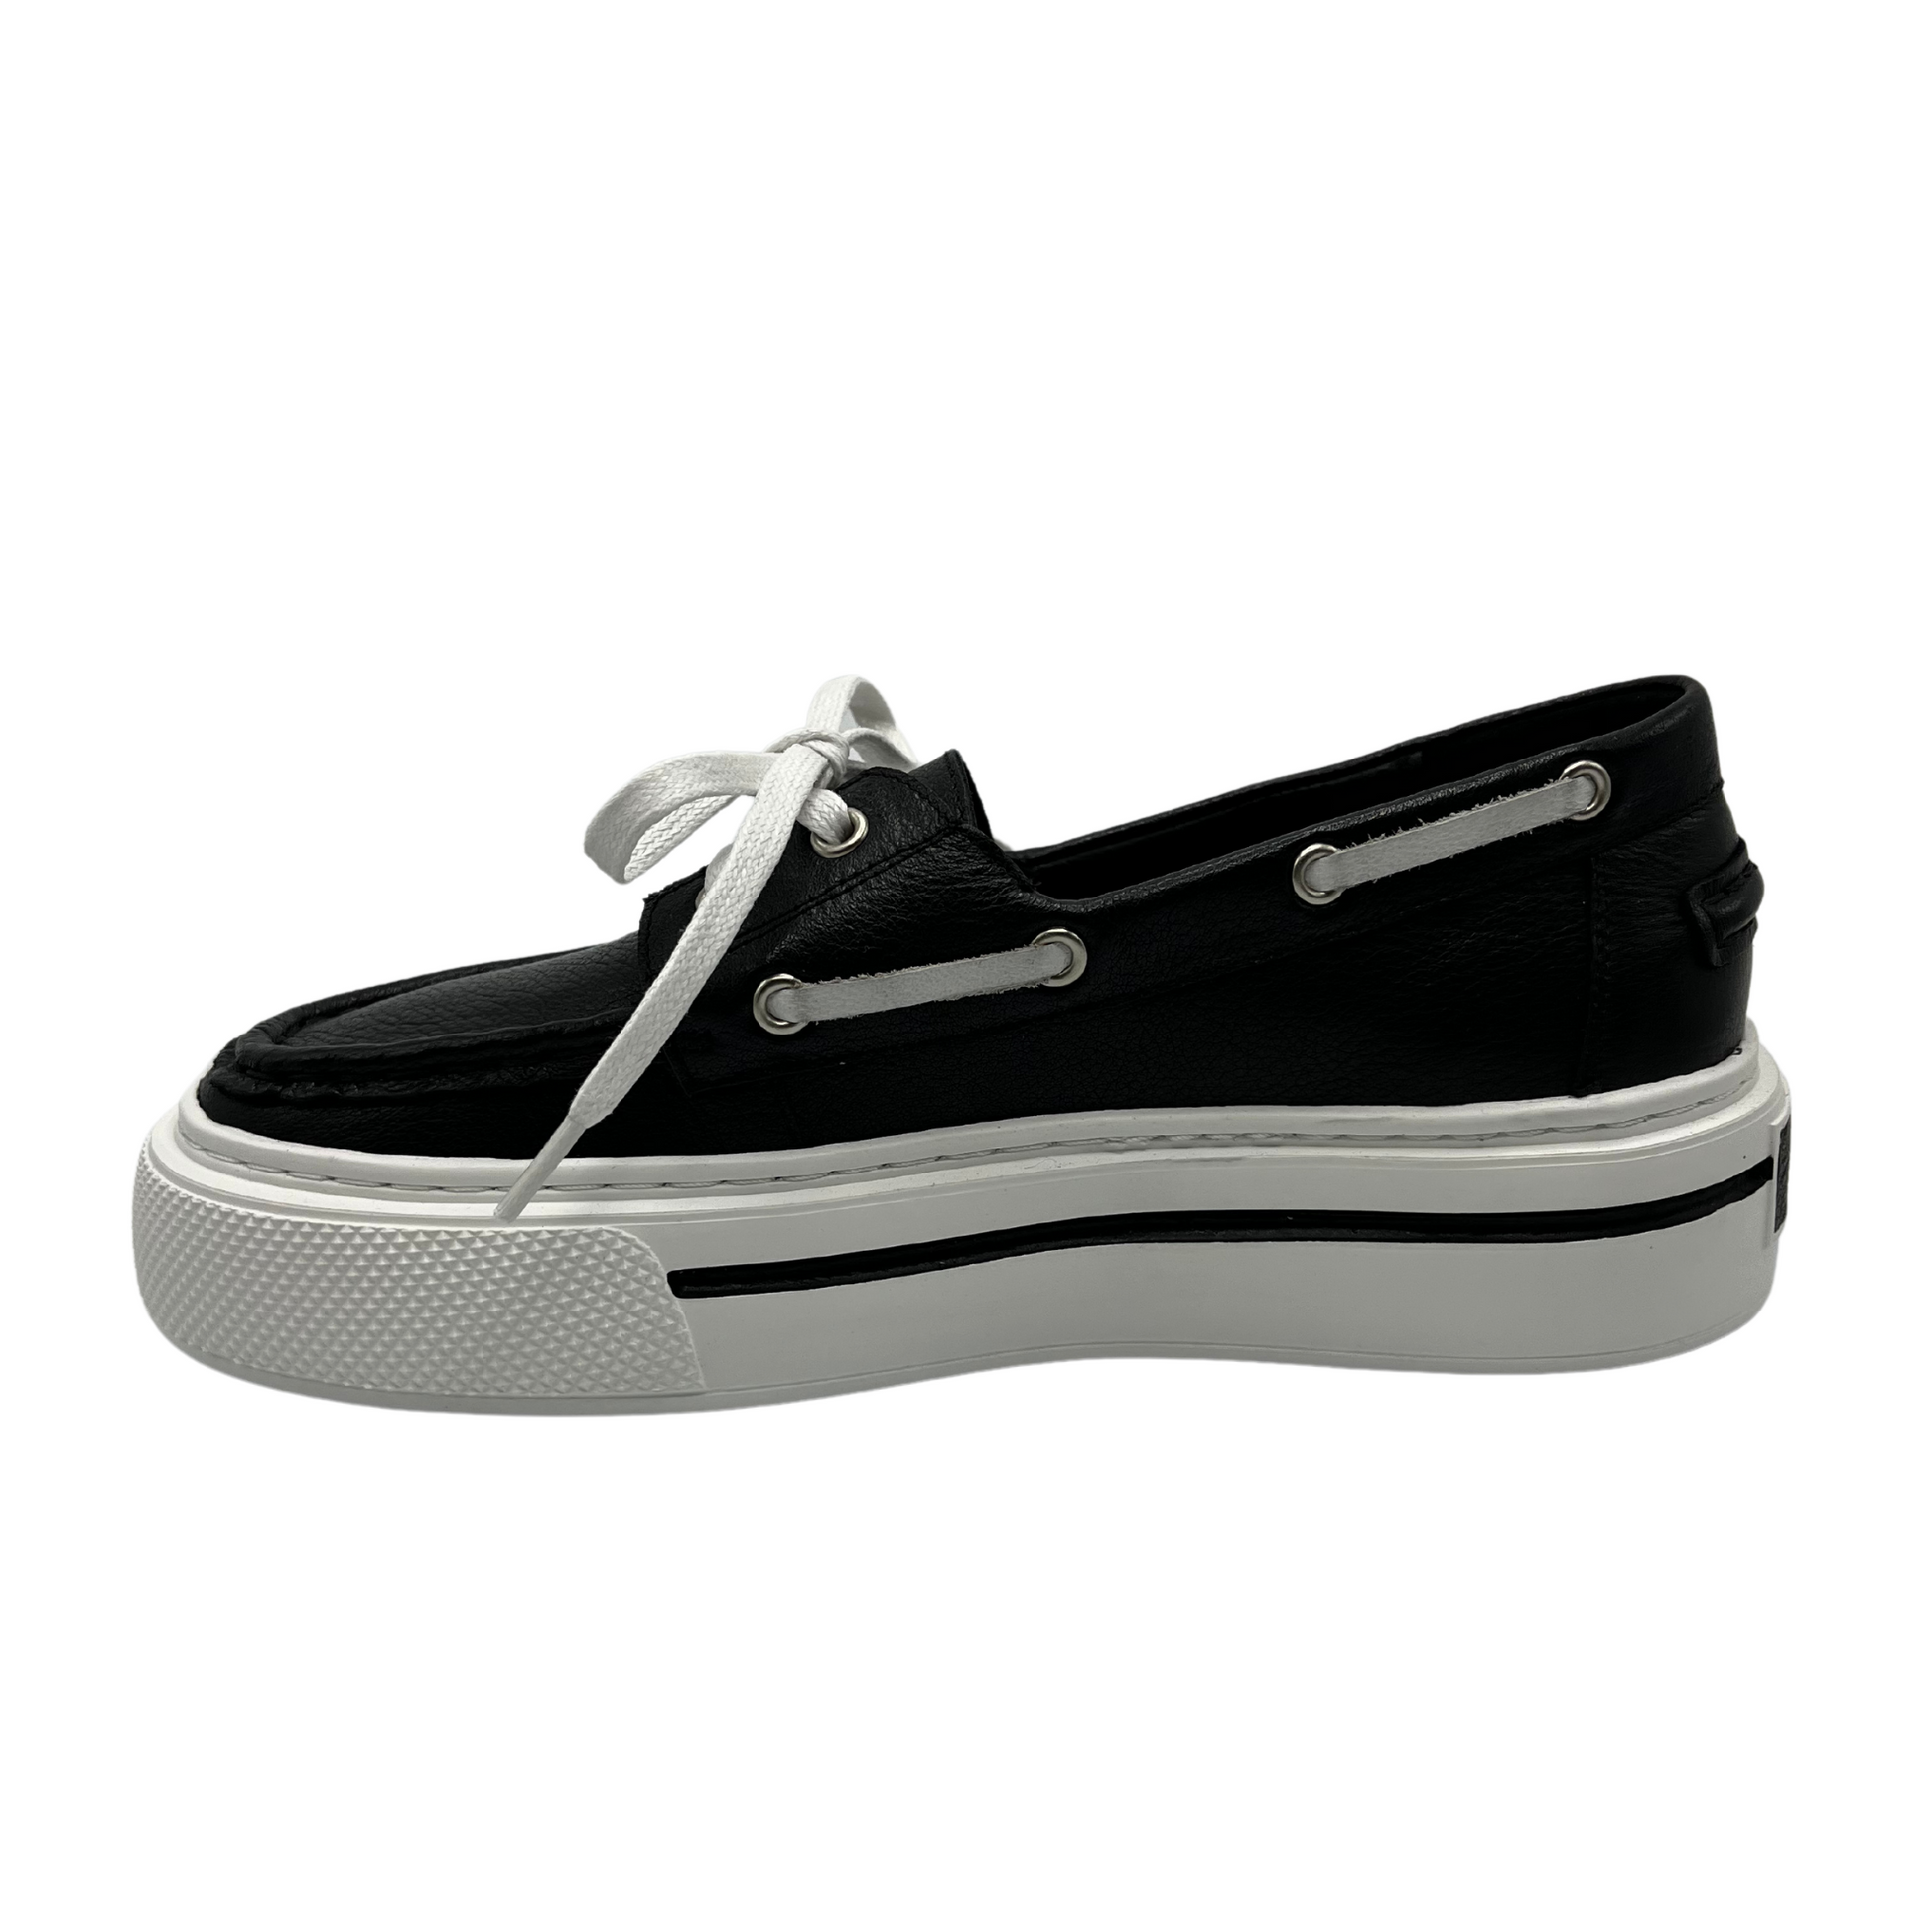 Left facing view of a black leather boat shoe with white rubber platform outsole and white laces